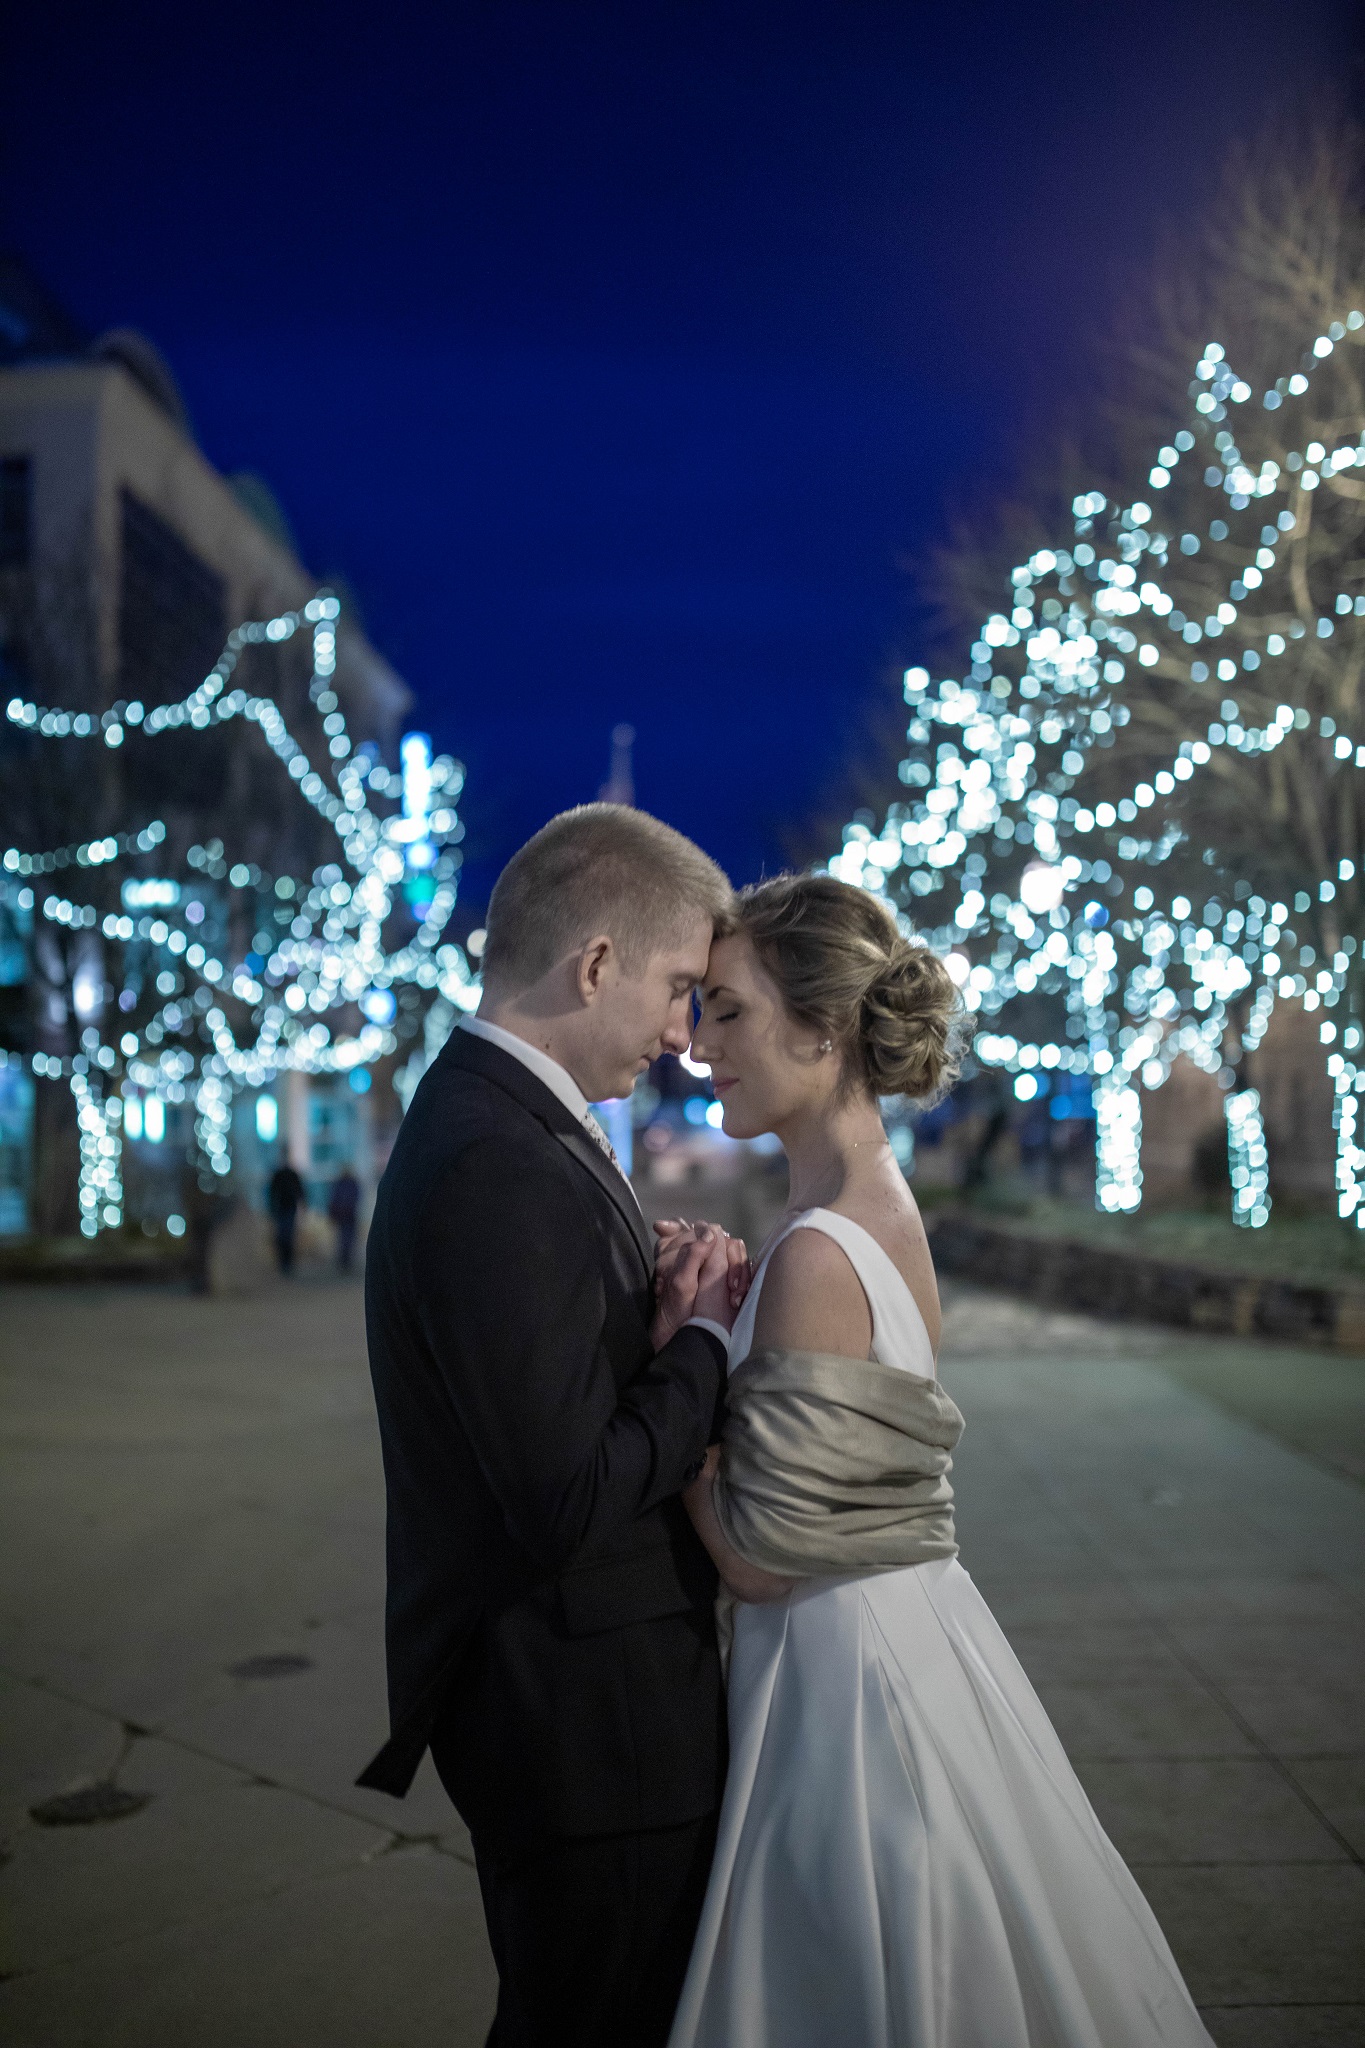 Wedding Photographers In Sioux Falls Sd Complete Weddings Events Sioux Falls